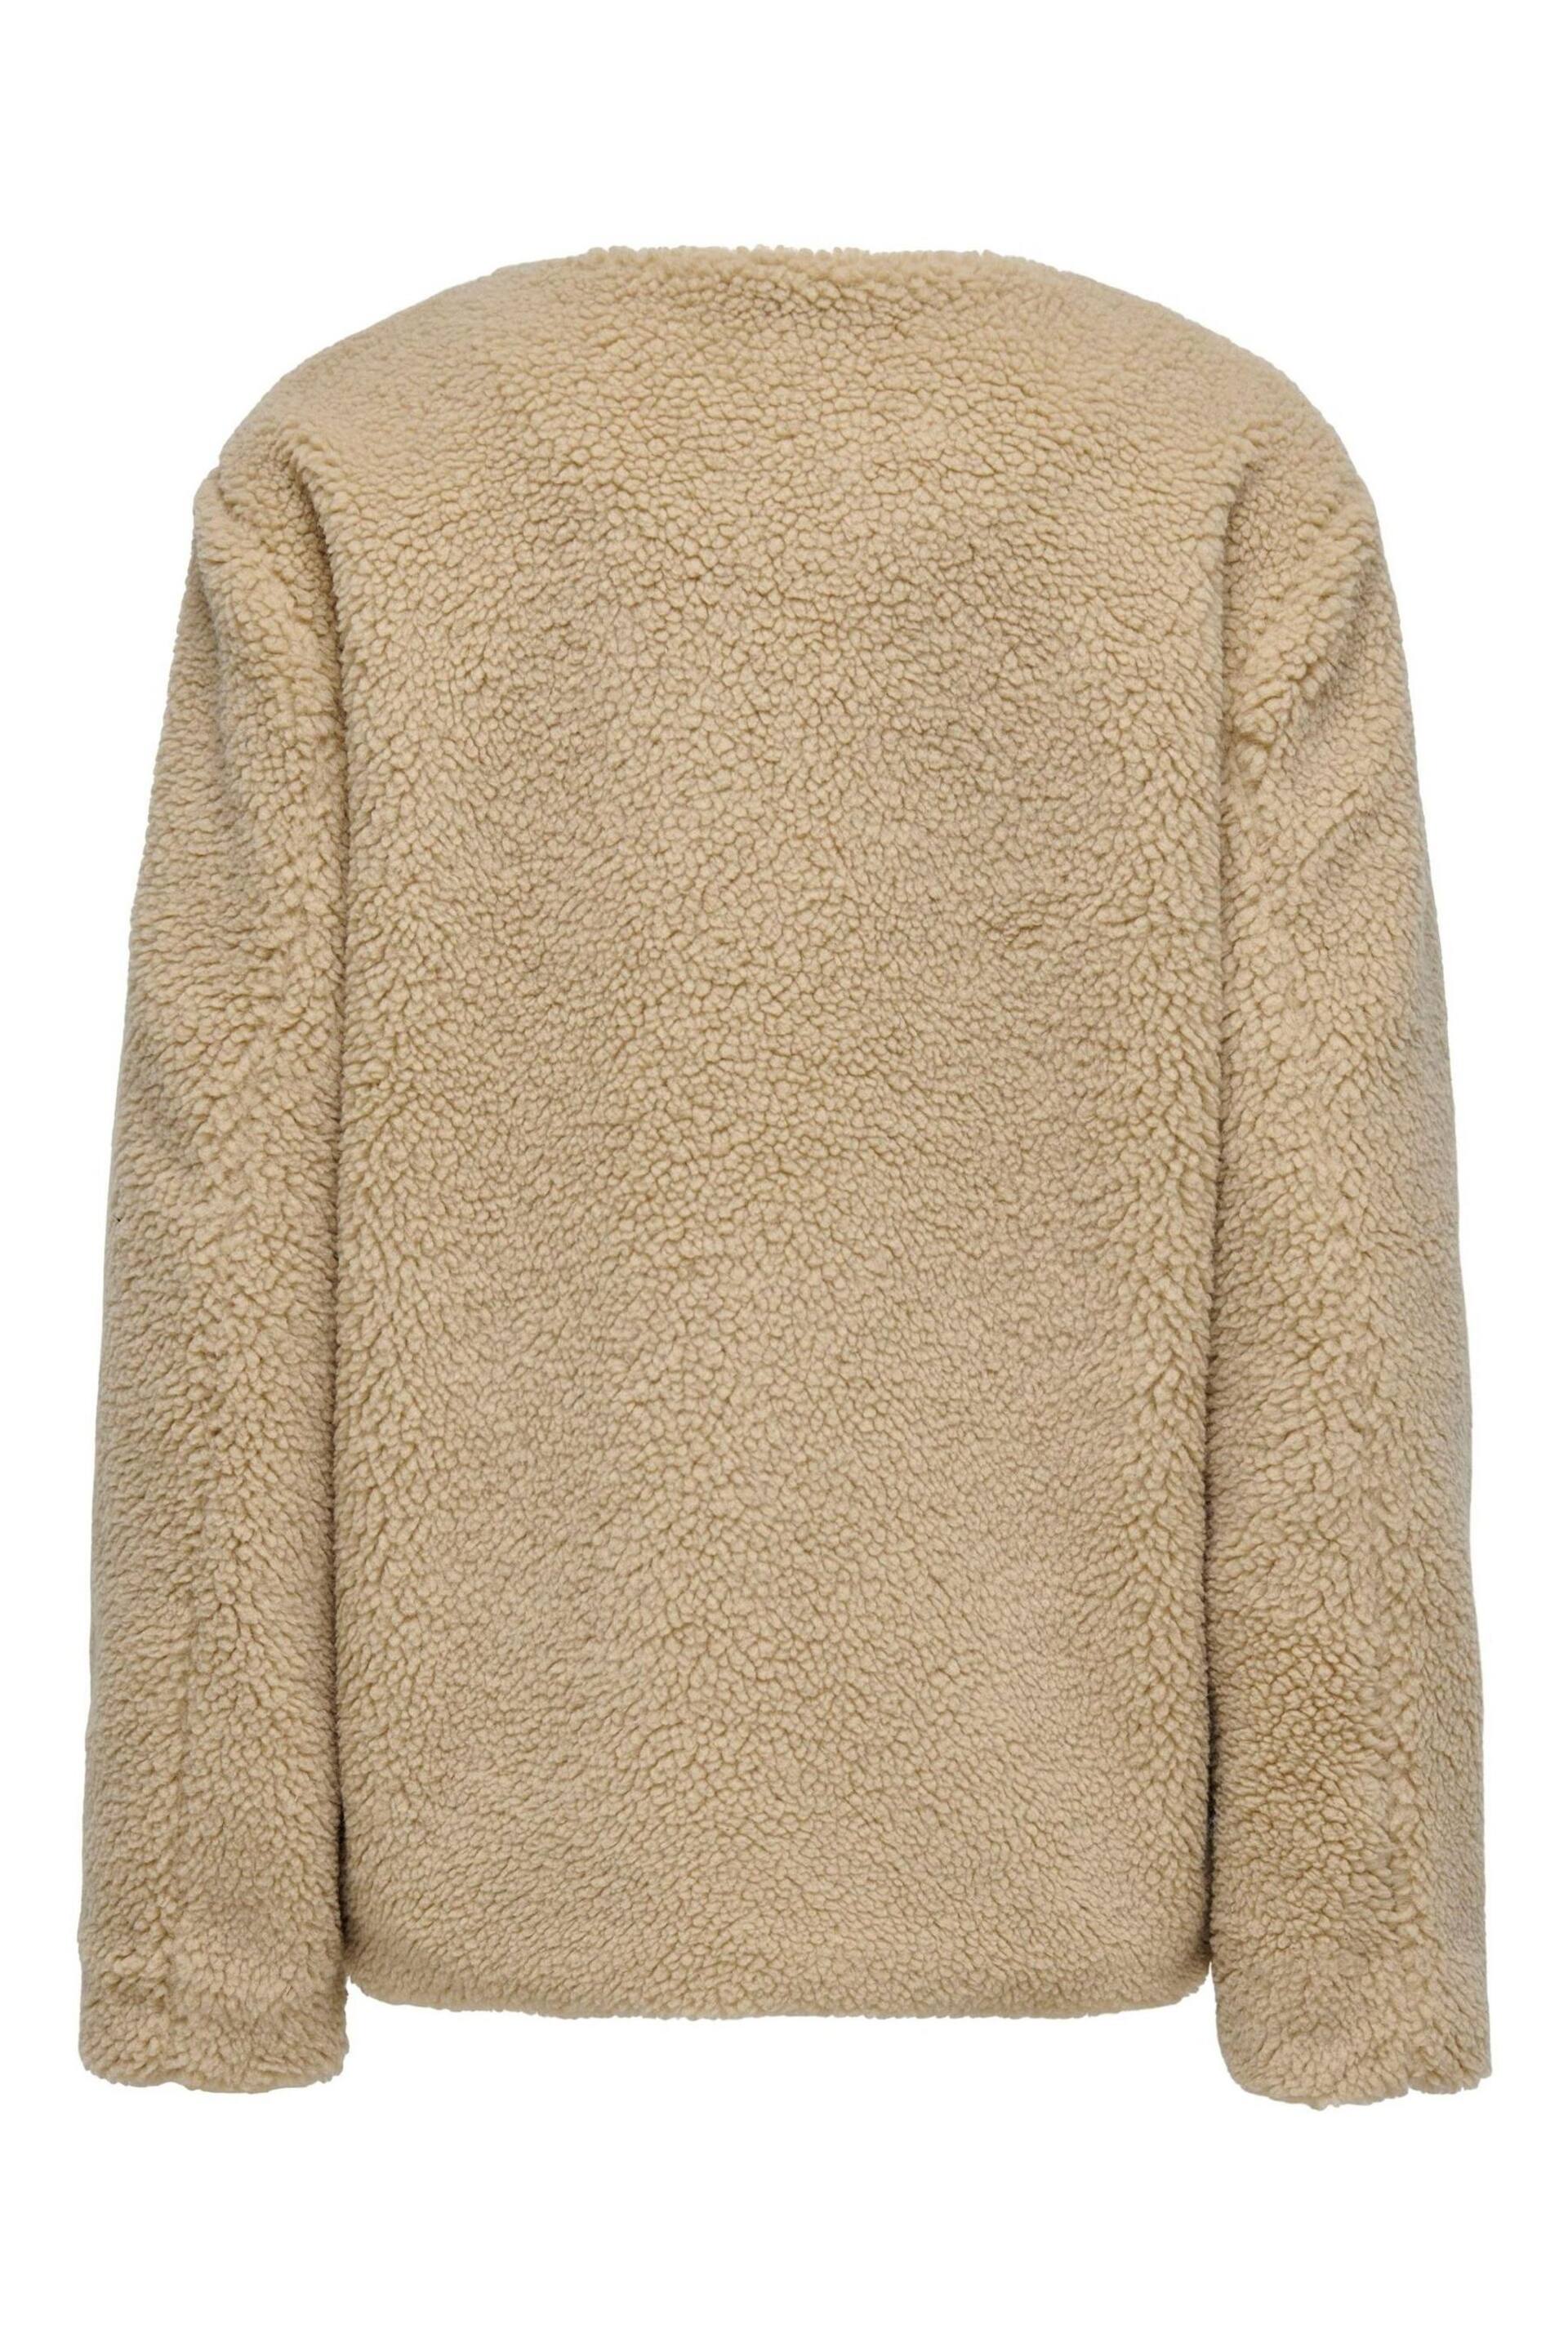 ONLY Cream Collarless Cosy Teddy Borg Coat With Toggle Button - Image 7 of 7